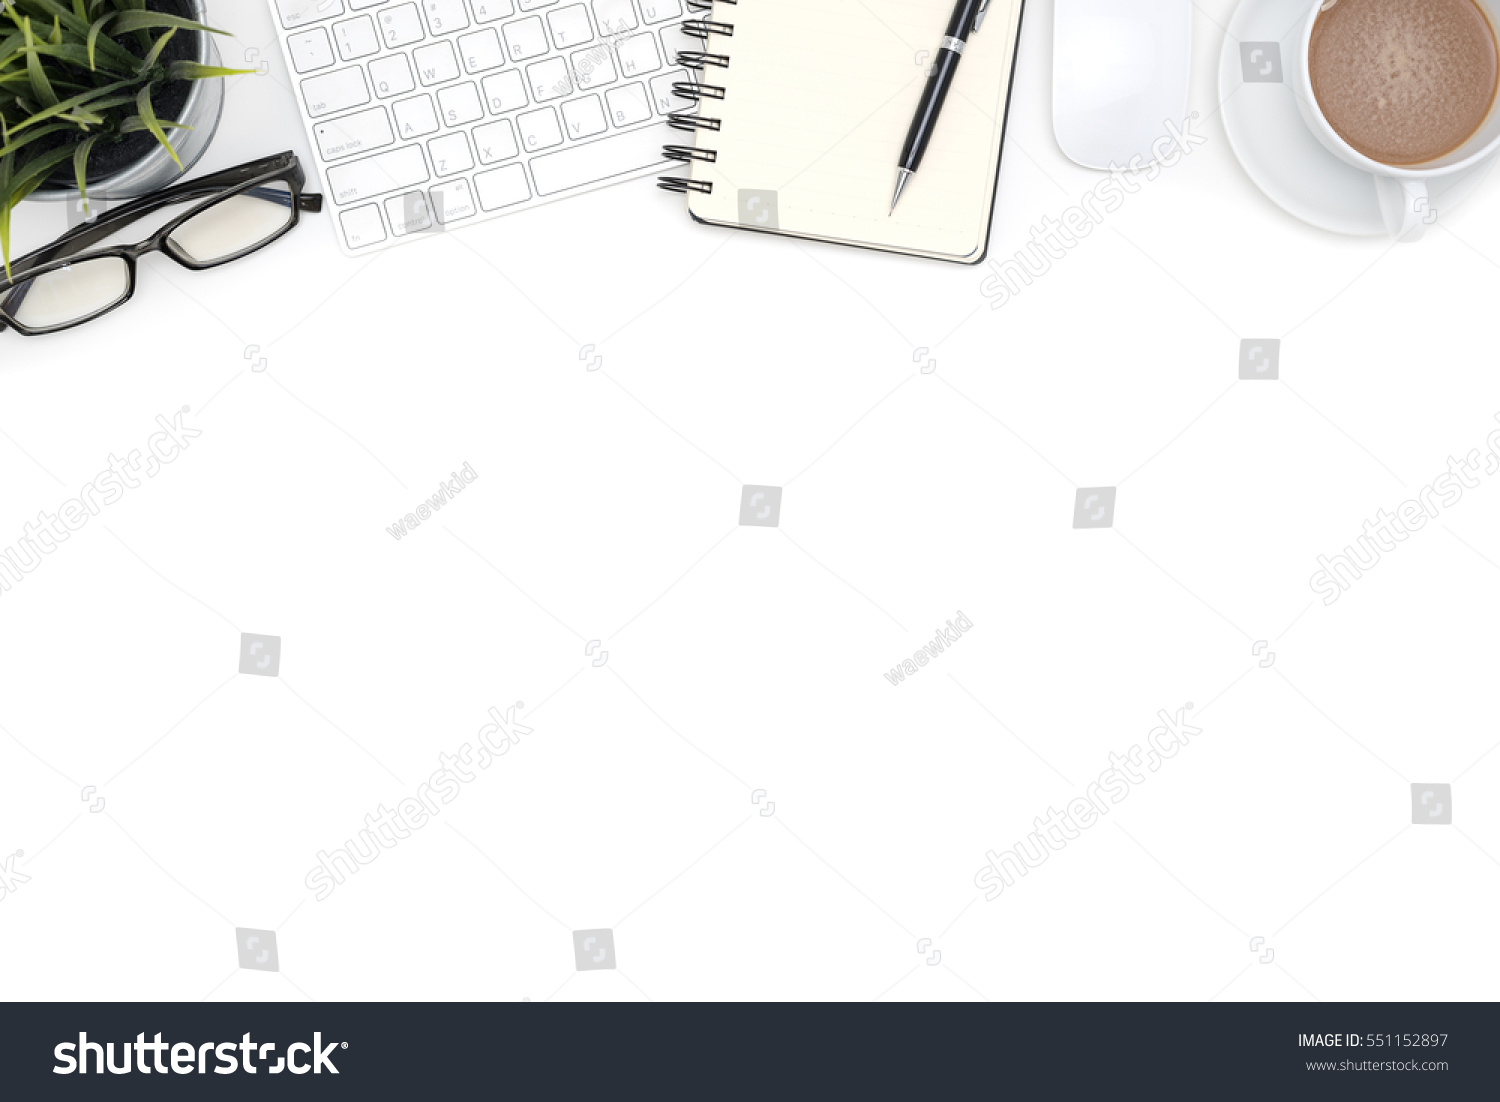 White Office Desk Table Computer Supplies Stock Photo 551152897 ...